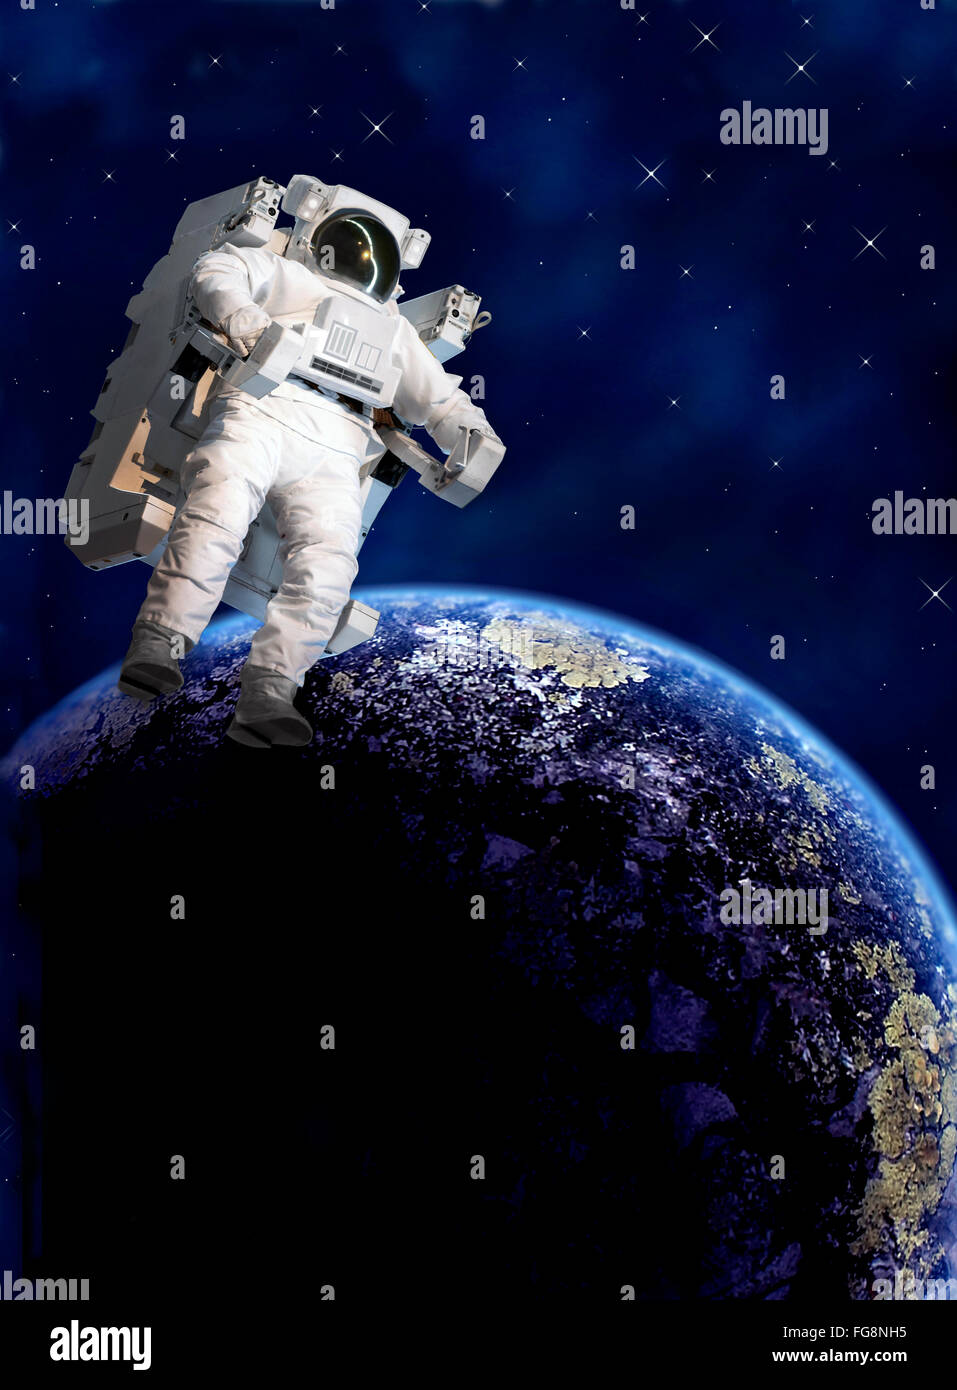 Premium Photo  Astronaut on the hill a spaceman standing on a hill  surrounded by floating rocks digital art style illustration painting